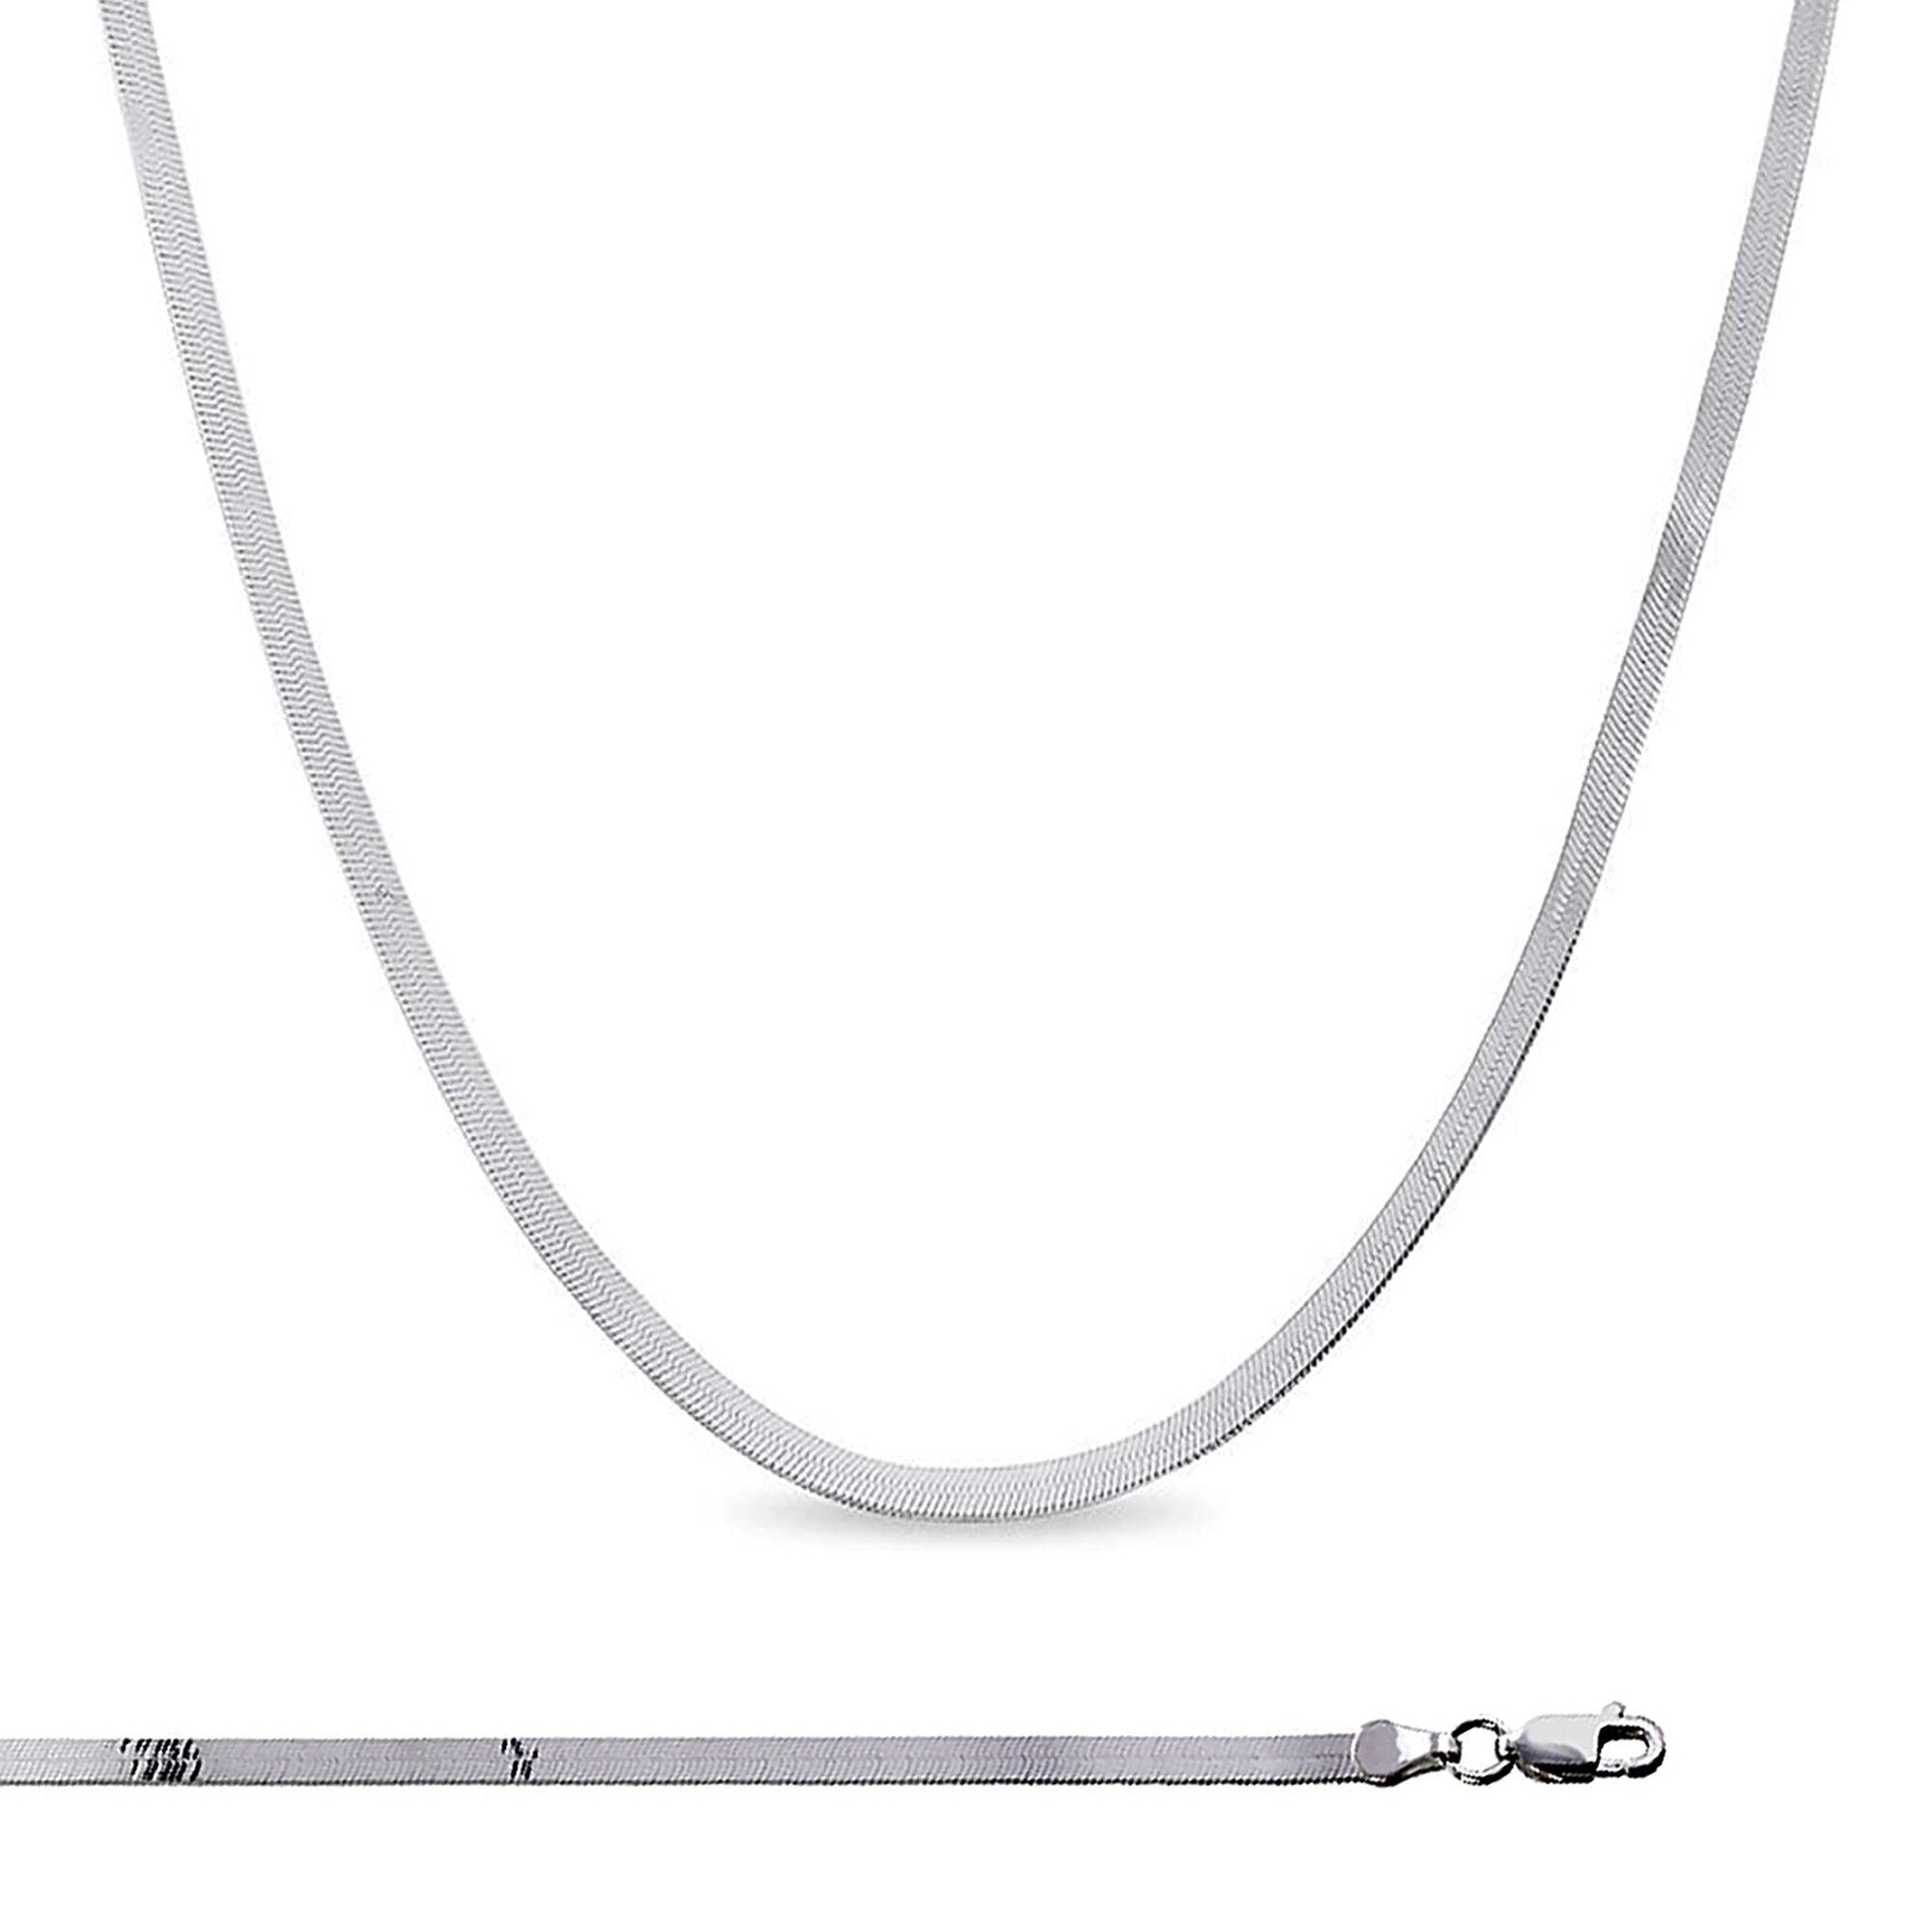 Delicate Silver Herringbone Chain 3.5mm Flat Herringbone Chain Necklace 16, 18 inches with 2" chain extender Gift for Her Everyday Necklace - DLUXCA